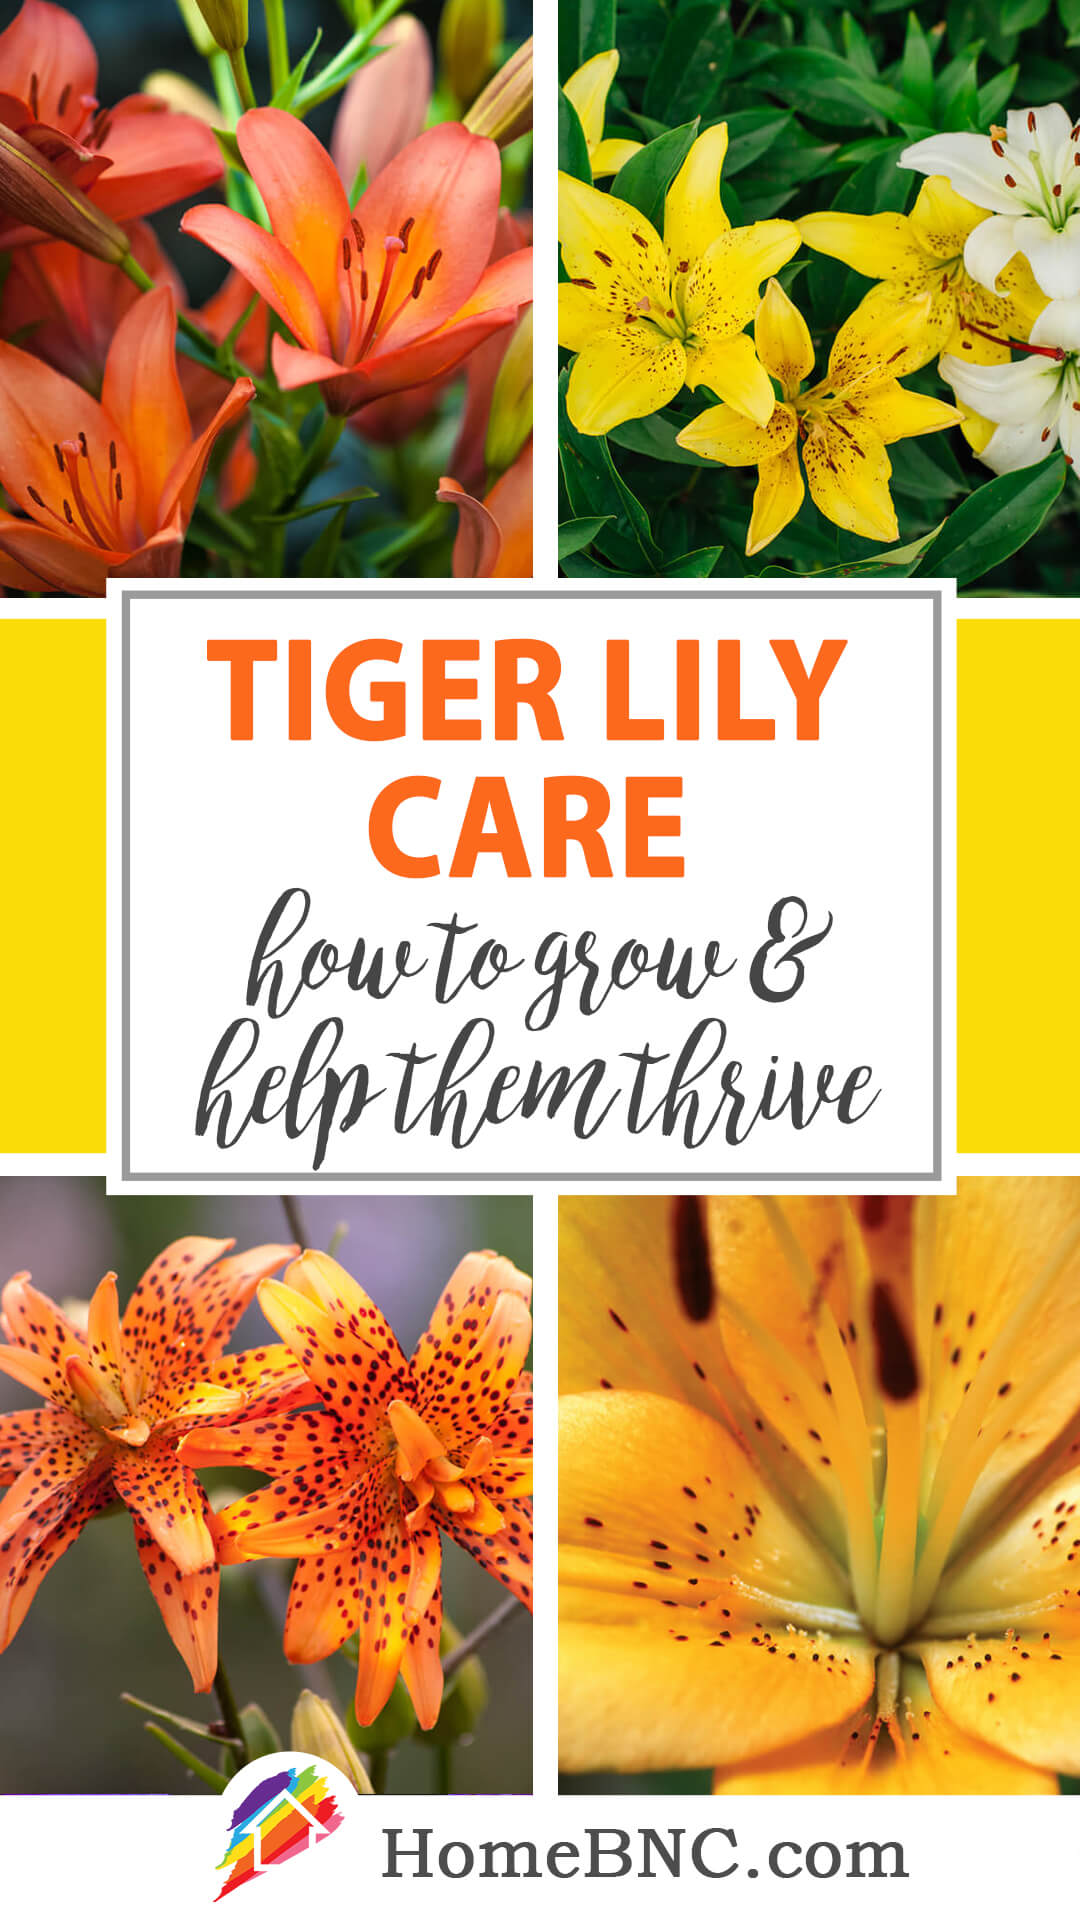 Tiger lily care